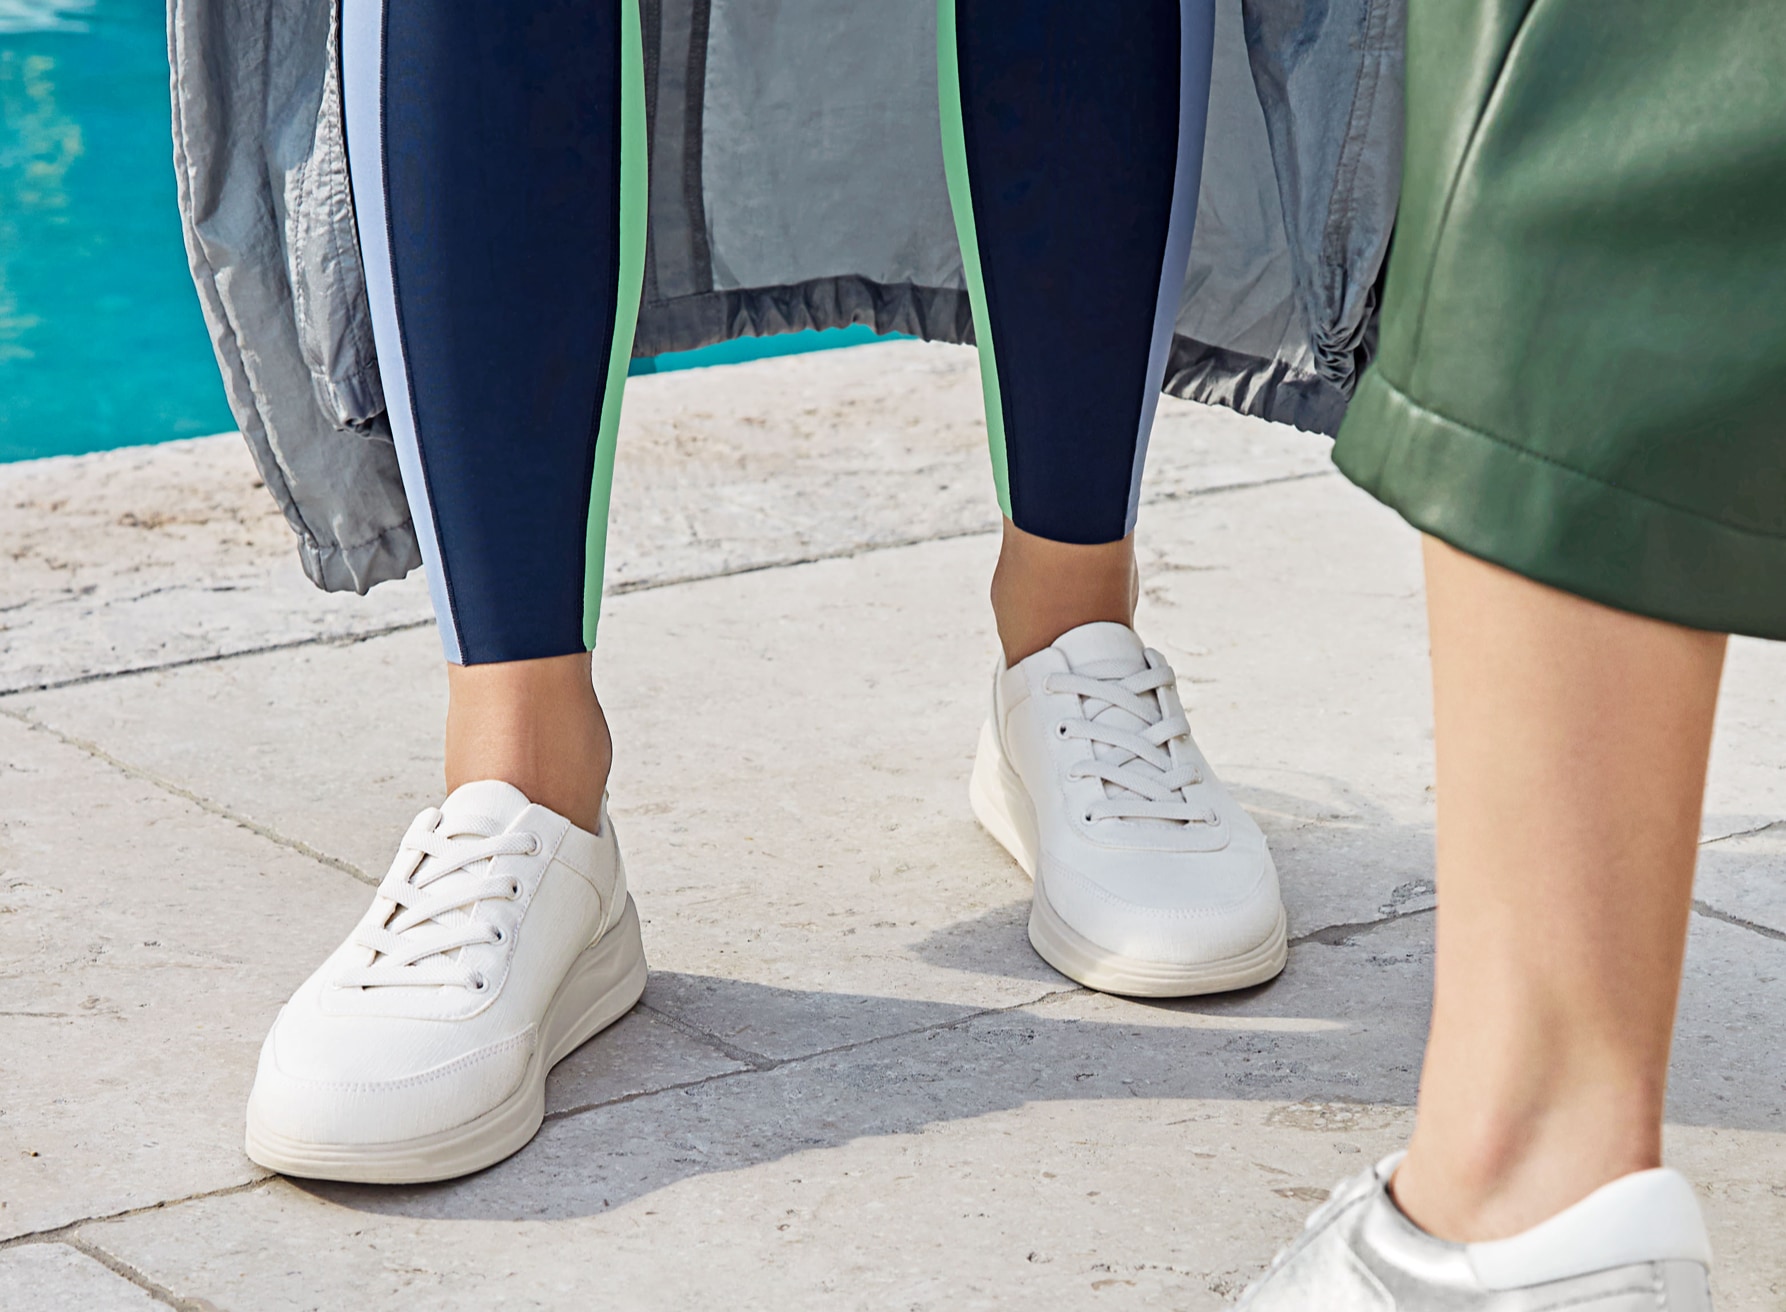 Stay comfy at the airport in Times square slip on sneakers